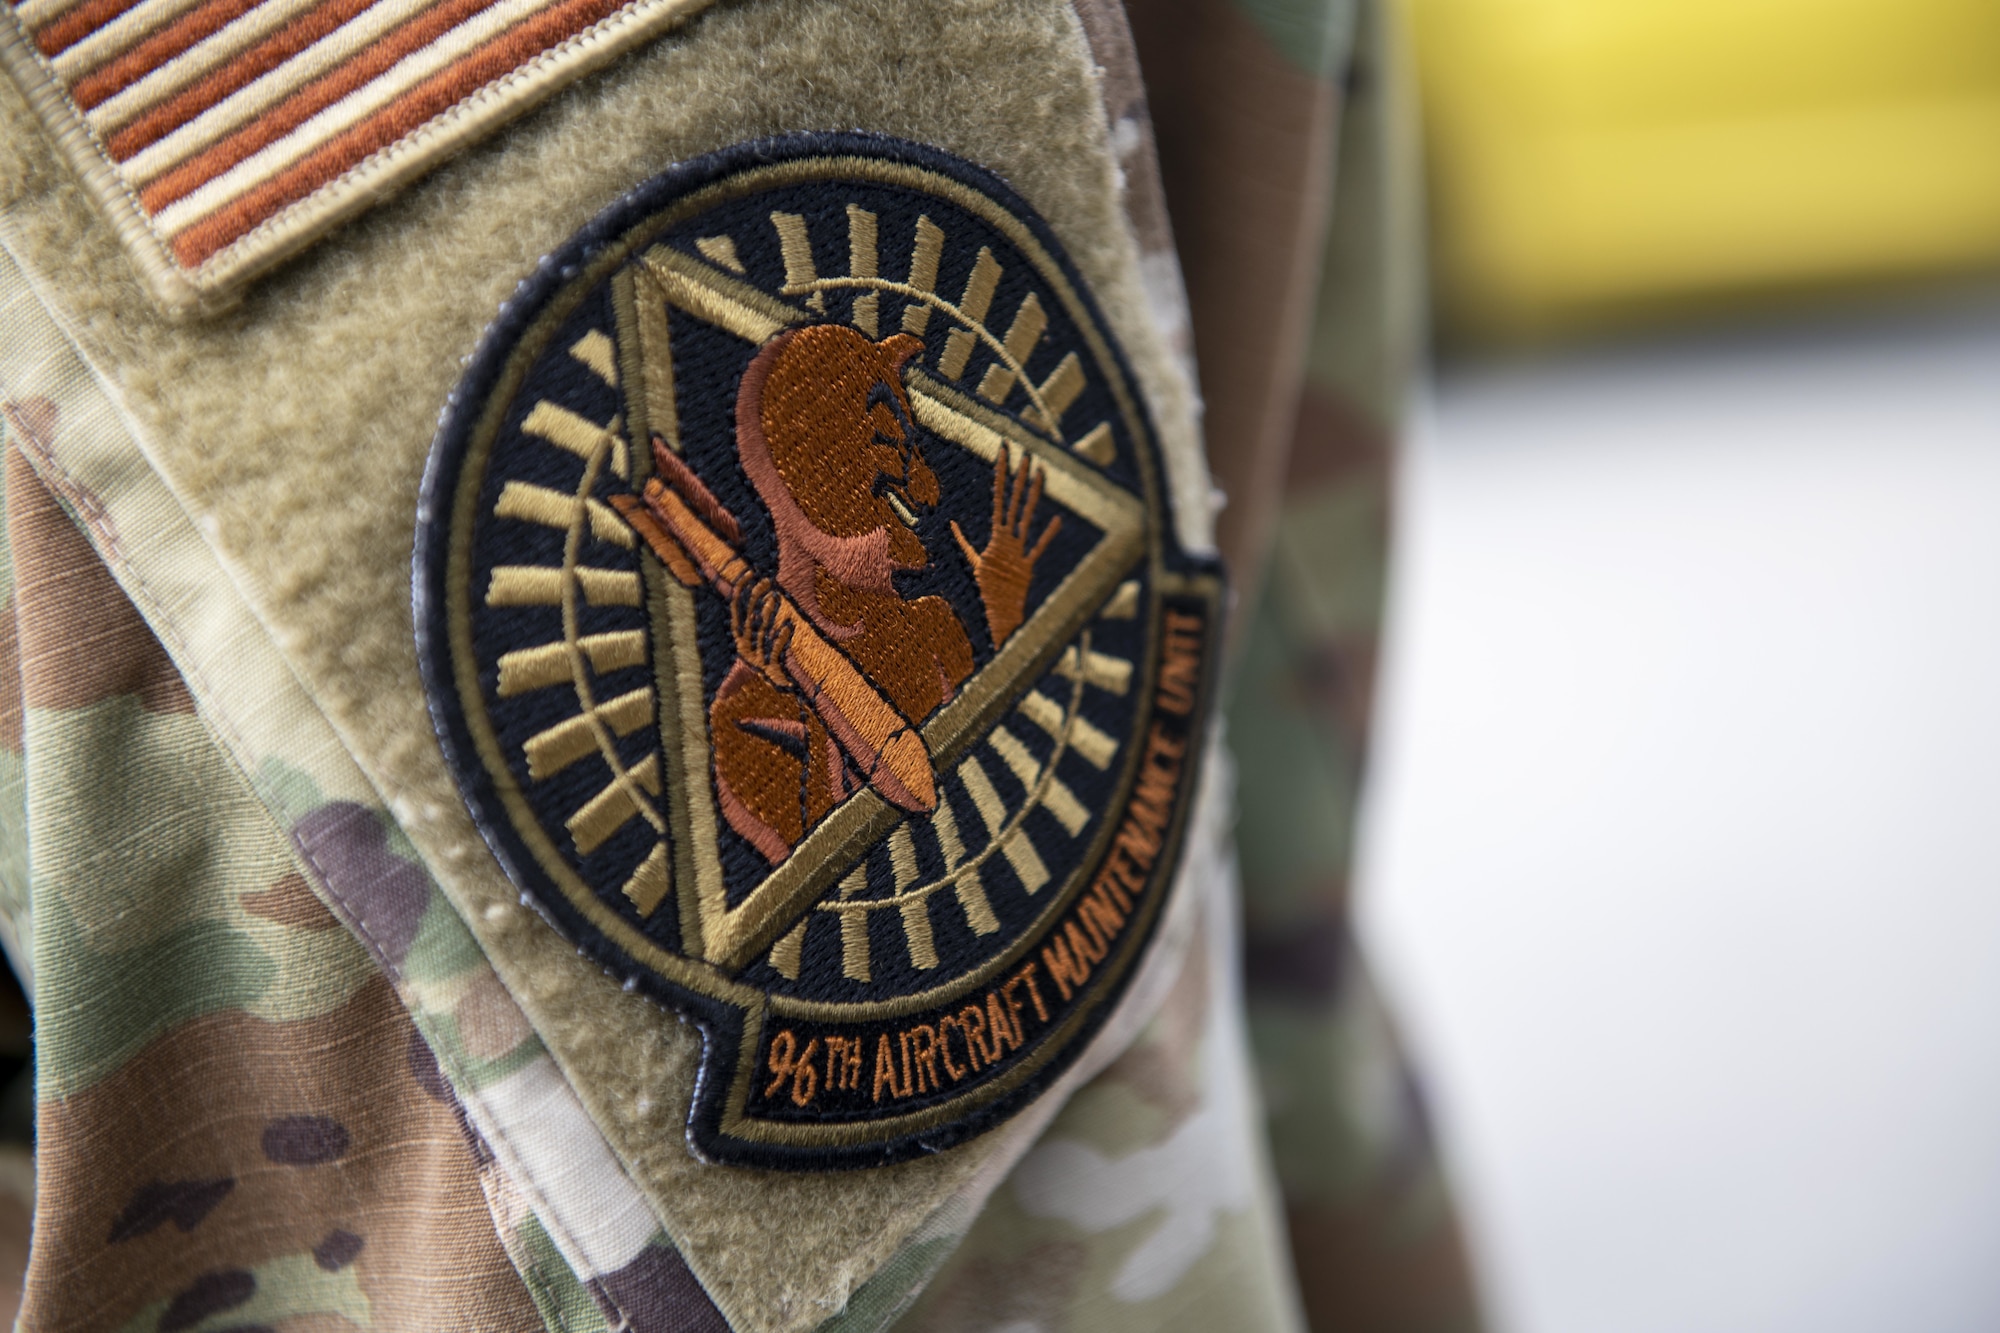 A 96th Bomb Squadron patch is worn by a U.S. Air Force Airman during the arrival of B-52 Stratofortress aircraft at Andersen Air Force Base, Guam. Feb. 11, 2022. Bomber Task Force missions enable crews to maintain a high state of readiness and proficiency, and validate our always-ready global strike capability. (U.S. Air Force photo by Staff Sgt. Lawrence Sena)